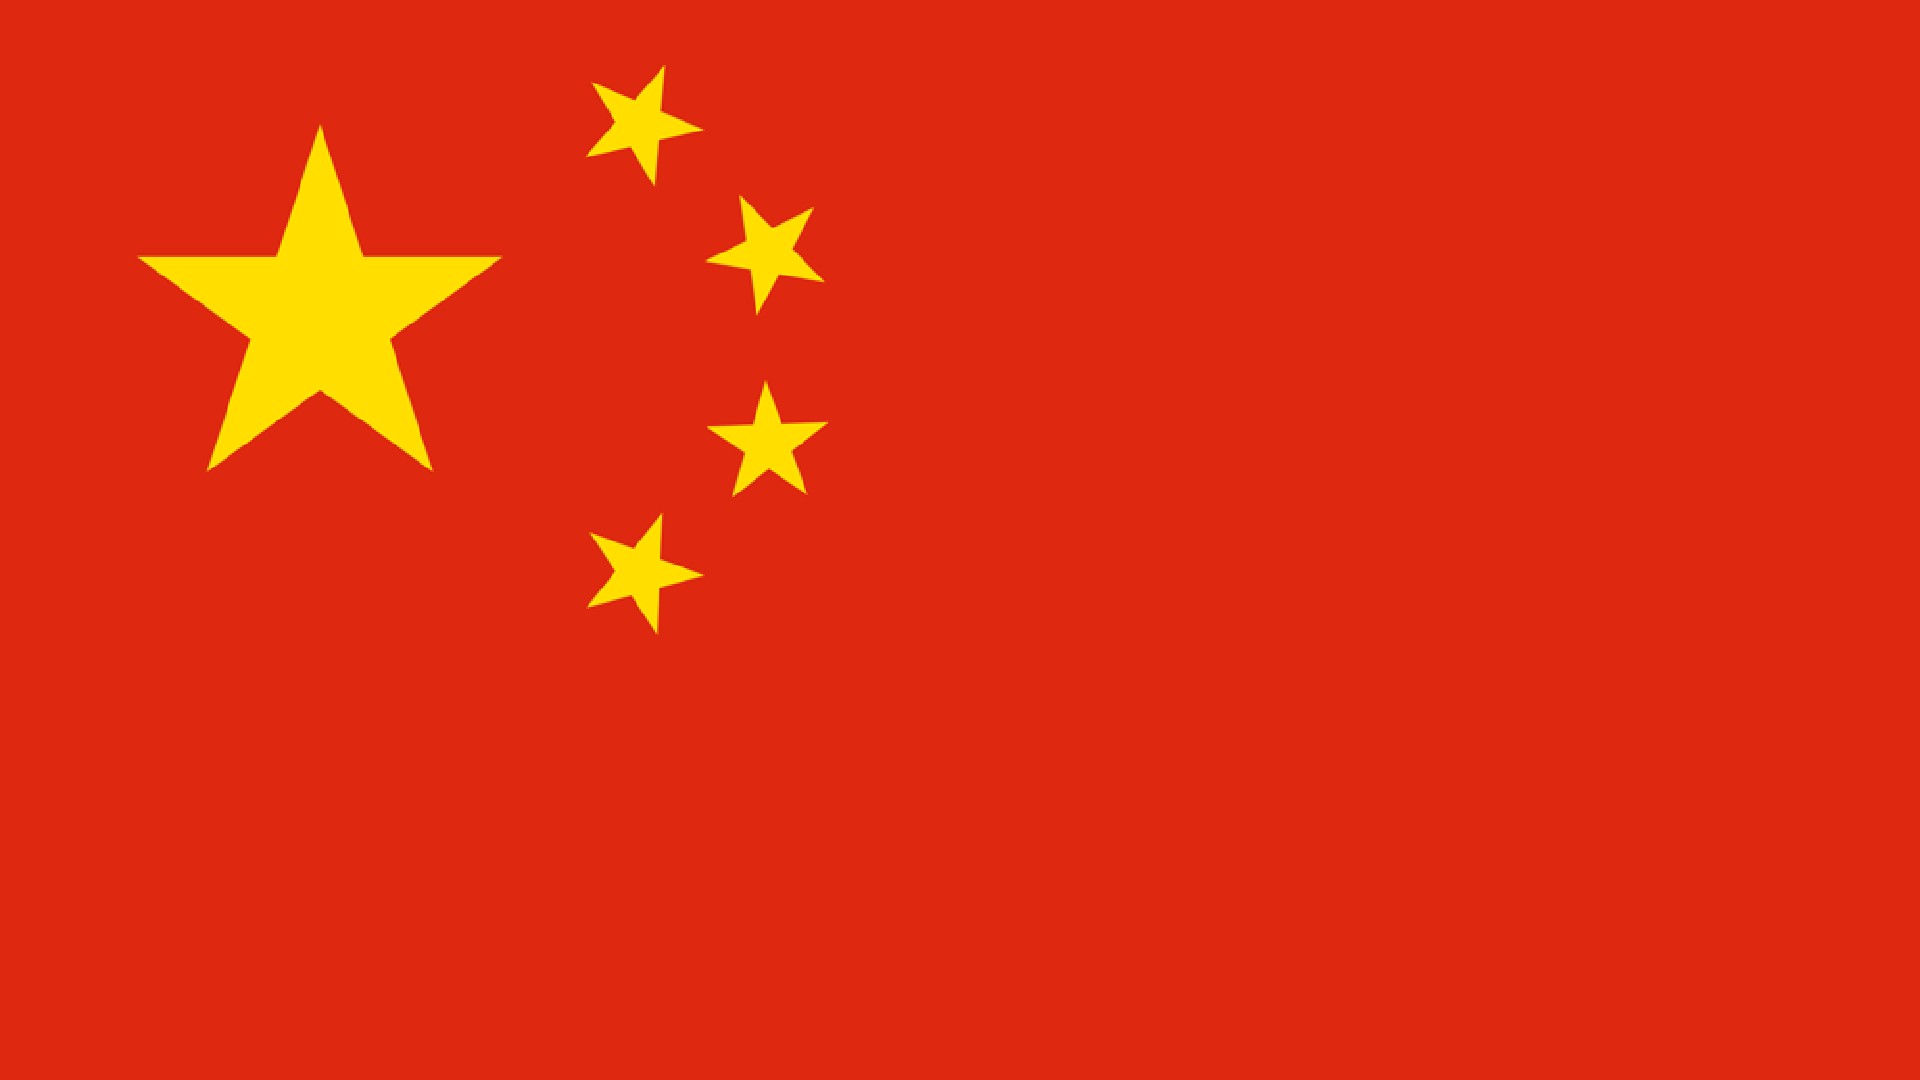 An image of the flag of China